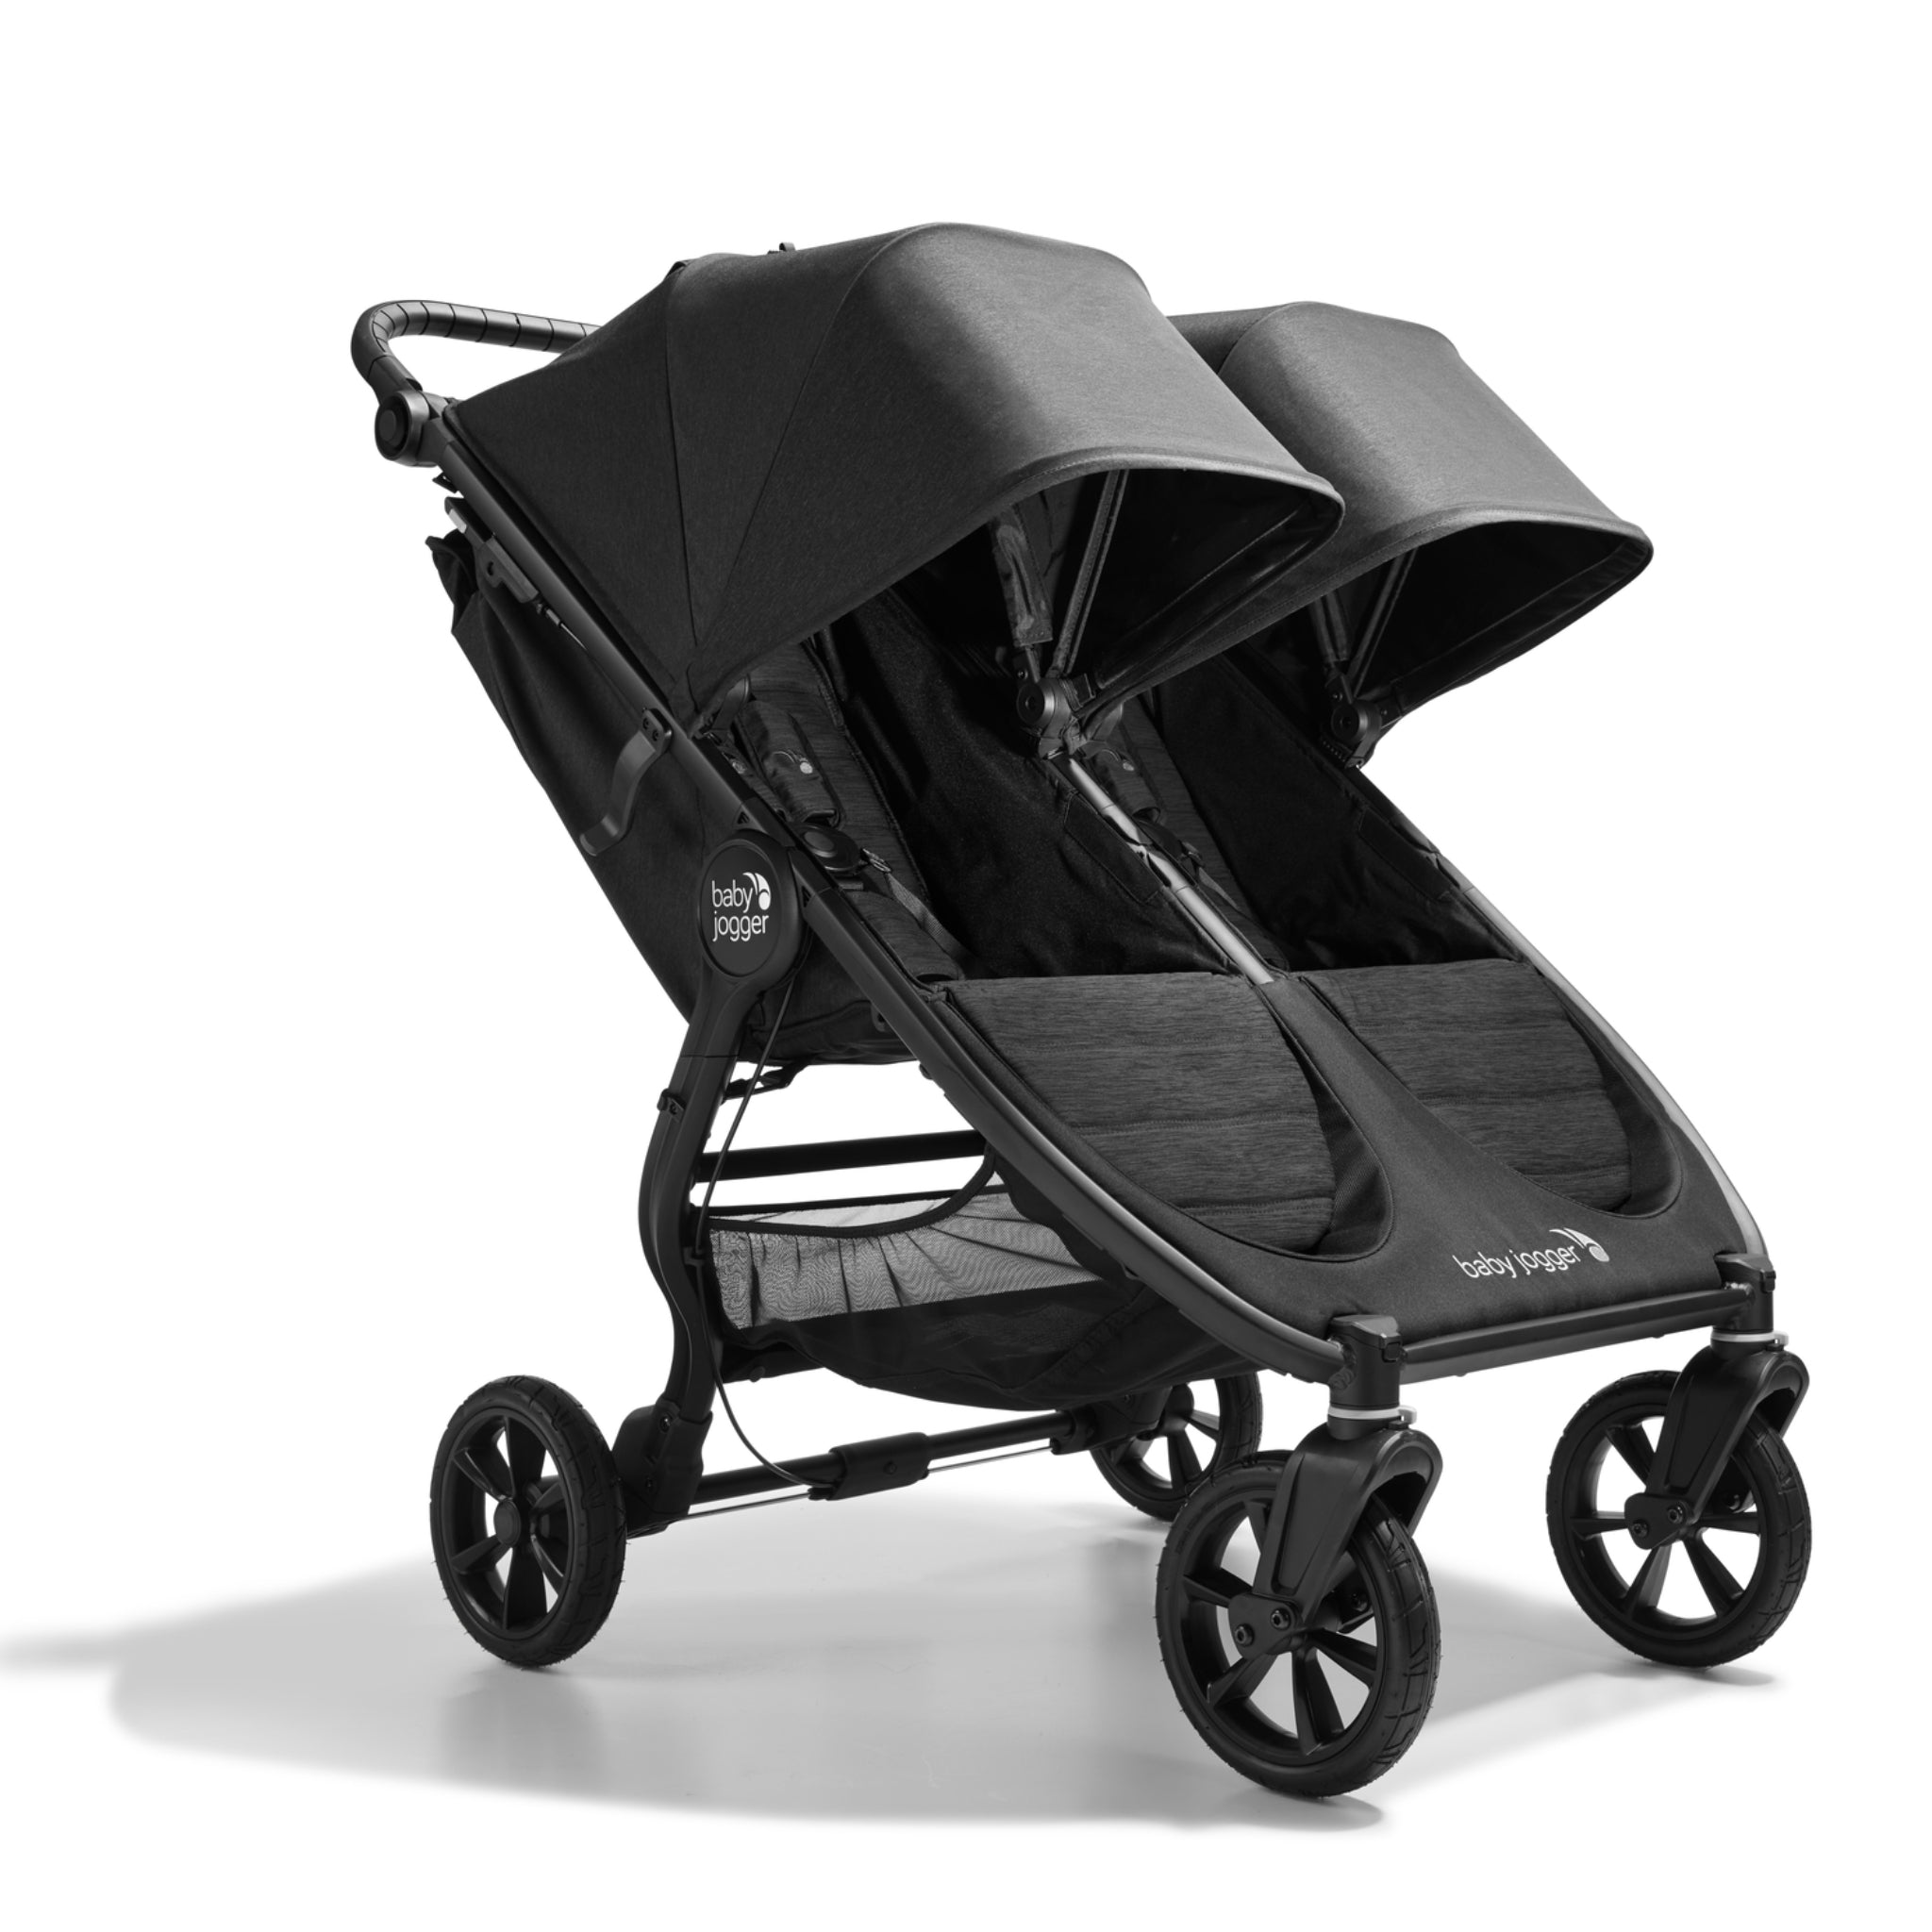 Stort univers lomme Kano Baby Jogger City Mini GT2 Double Pushchair – DeWaldens